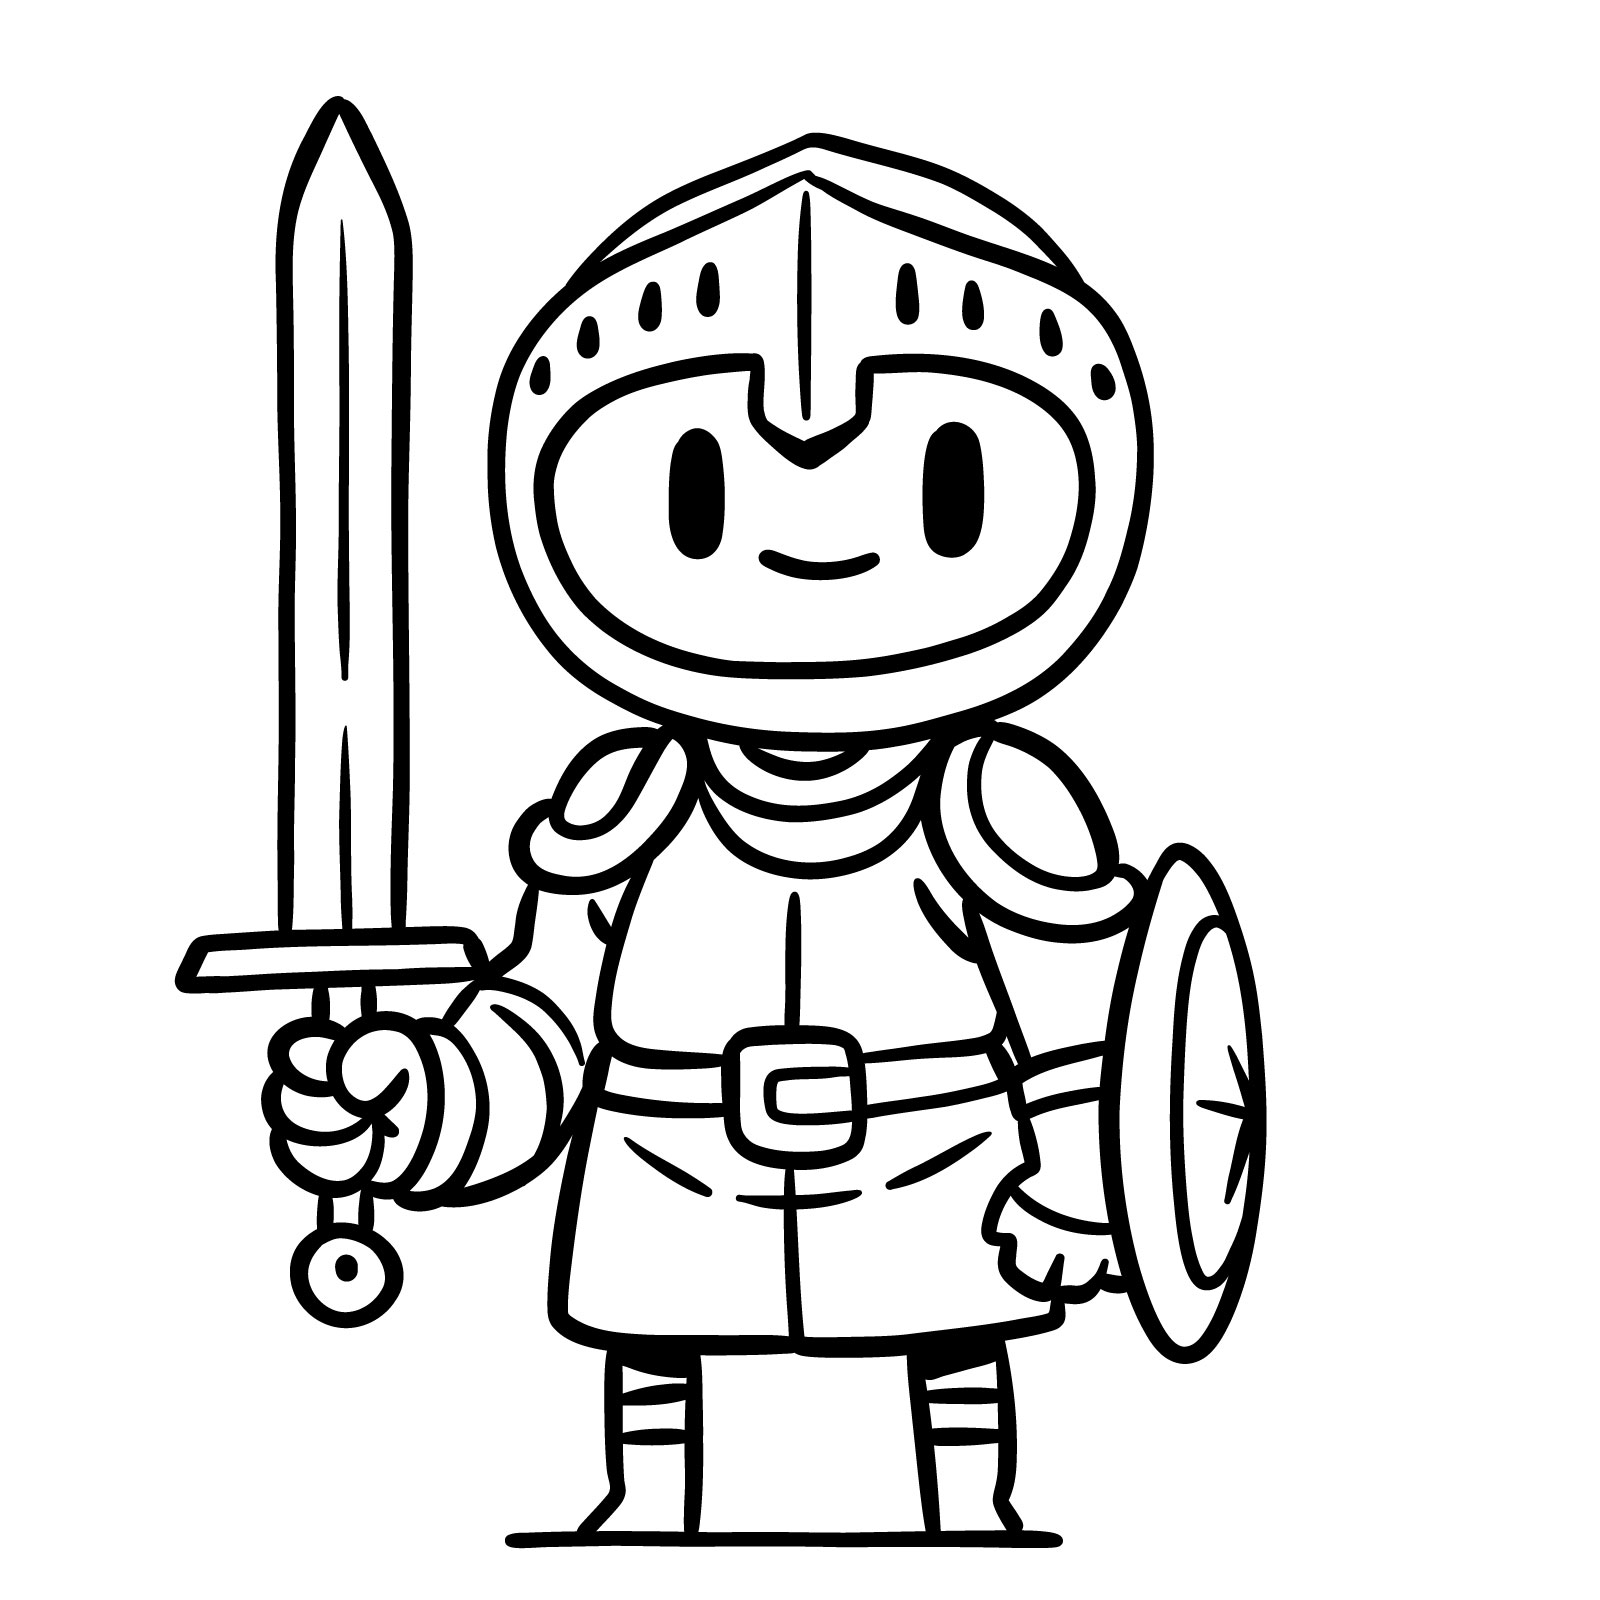 How to draw a cartoon paladin step 15: finished drawing